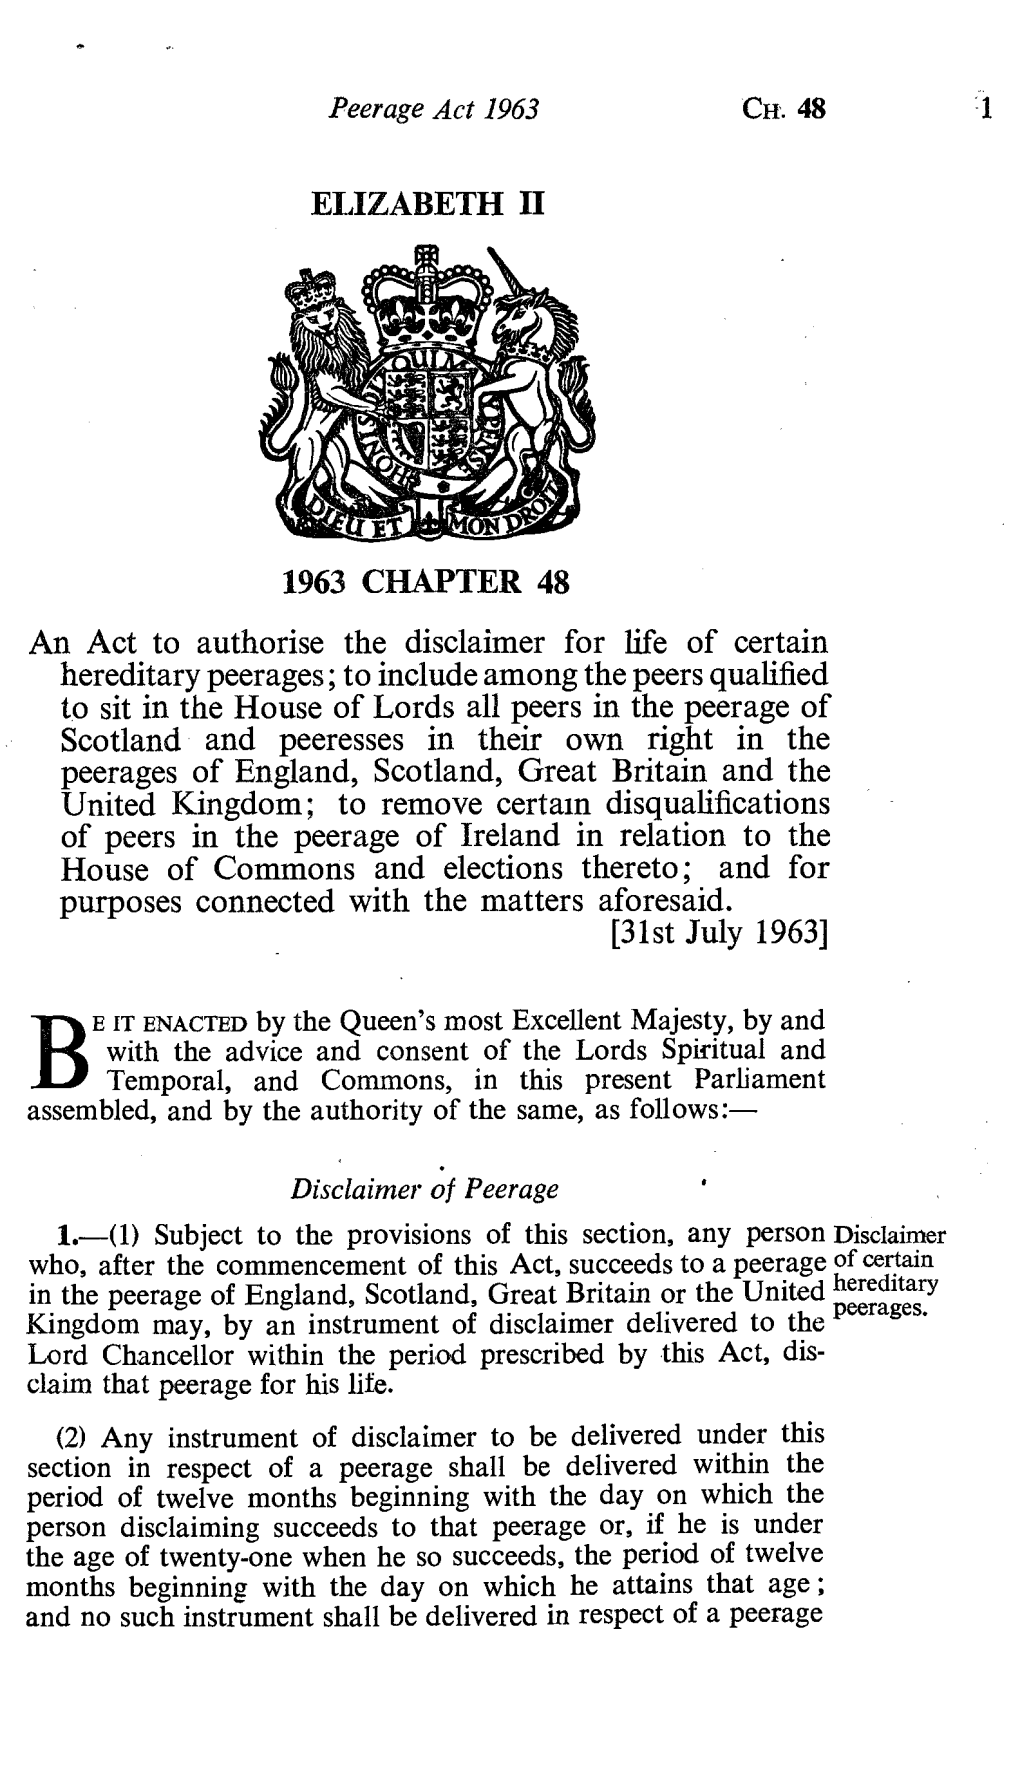 ELIZABETH II 1963 CHAPTER 48 an Act to Authorise the Disclaimer For